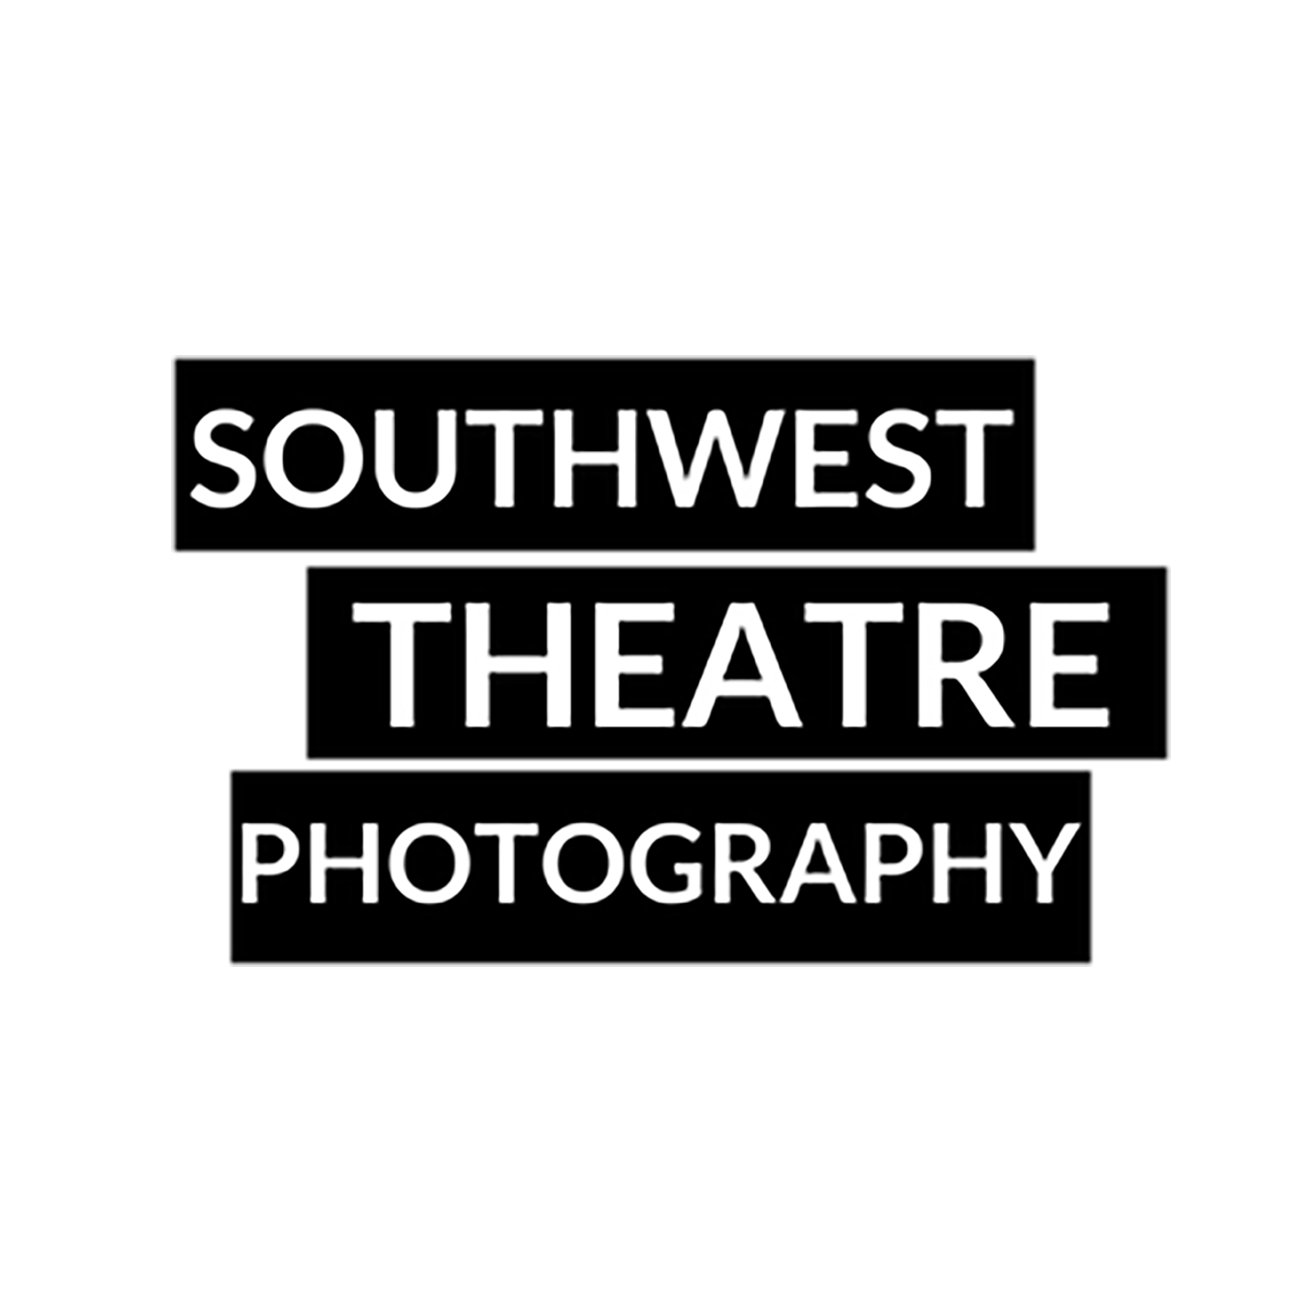 Devon based Theatre Photographer & Videographer. Headshots, Promotional material, Rehearsals, Dress Rehearsals.